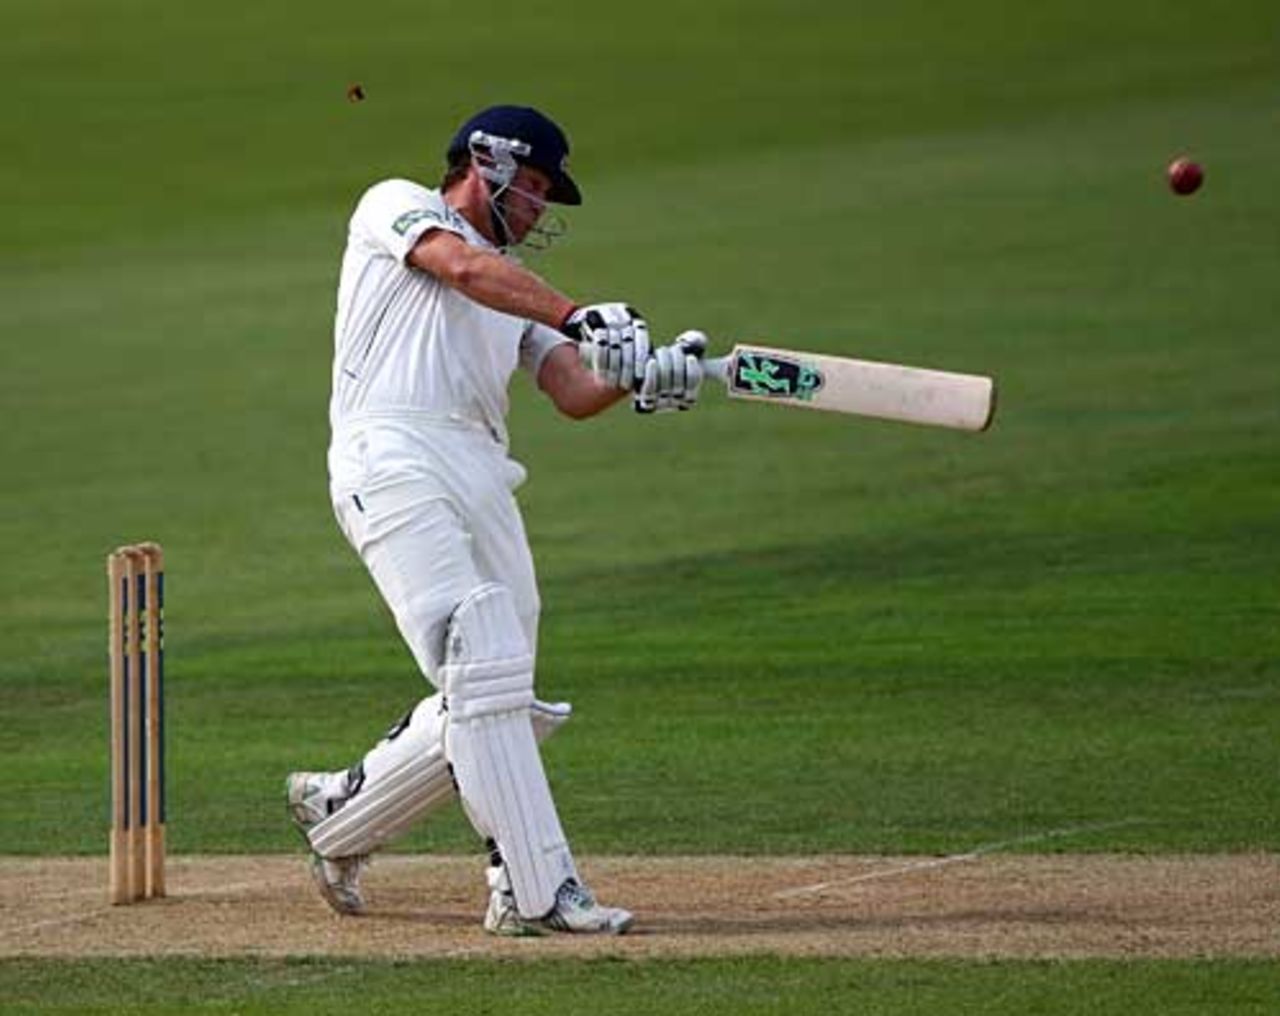 Sean Ervine launches another boundary during his hundred, Hampshire v Lancashire, County Championship, The Rose Bowl, August 7, 2009